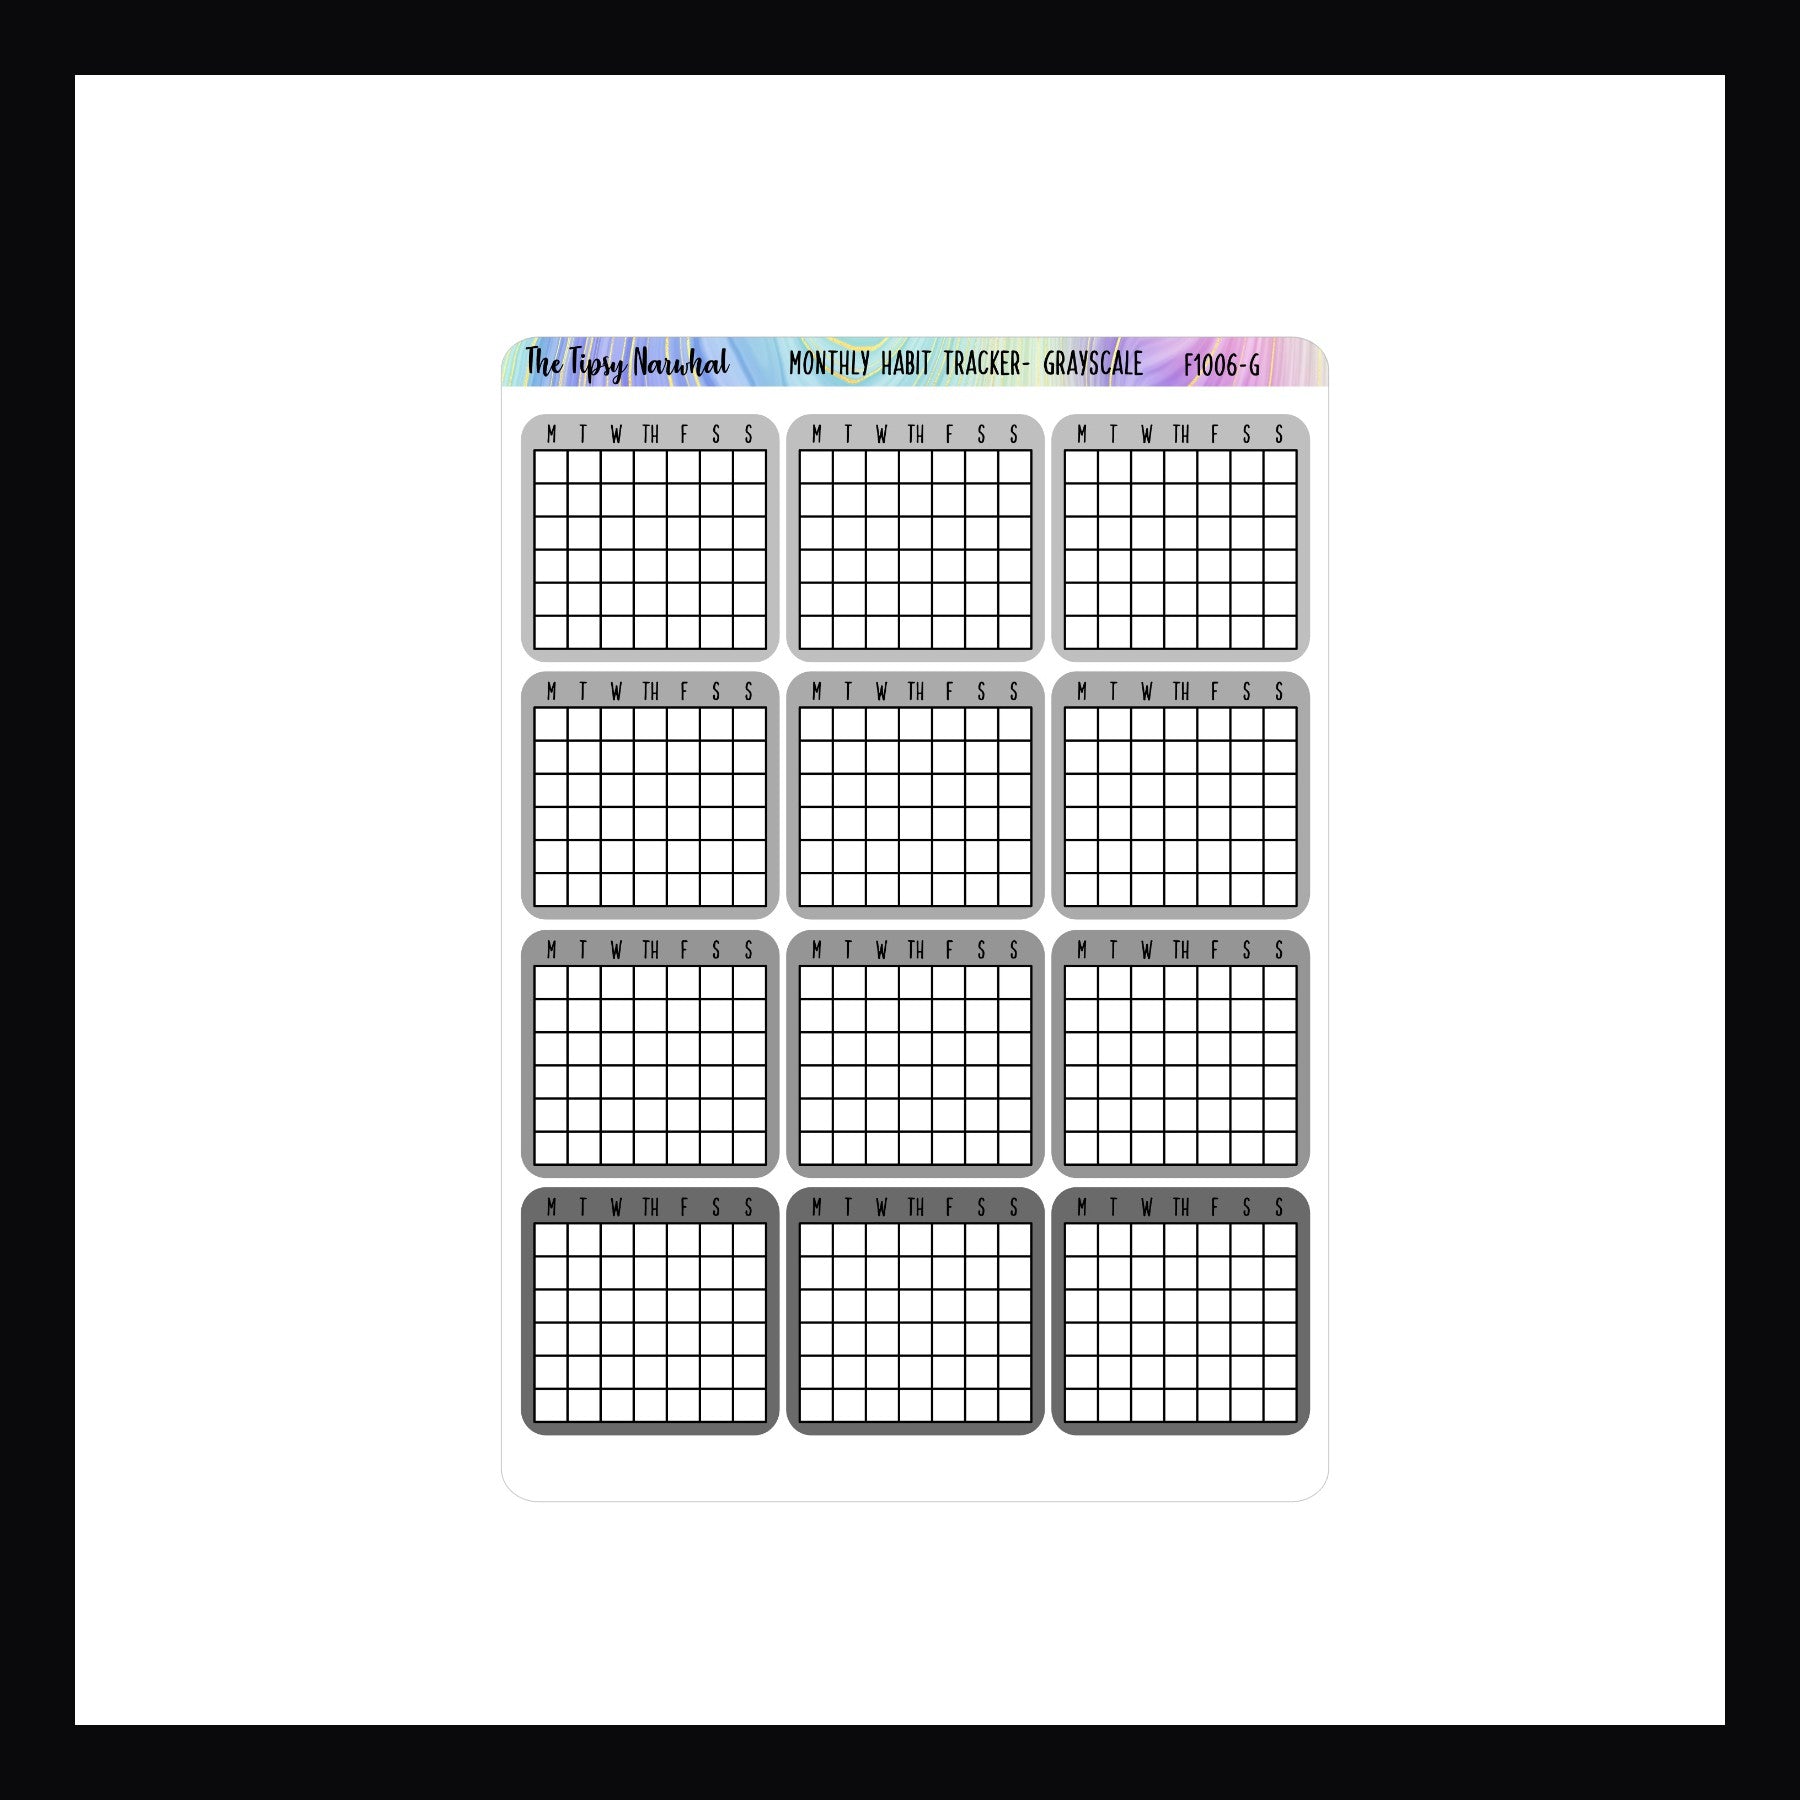 Grayscale monthly habit tracker, 12 individual stickers, single habit tracking, one month tracking